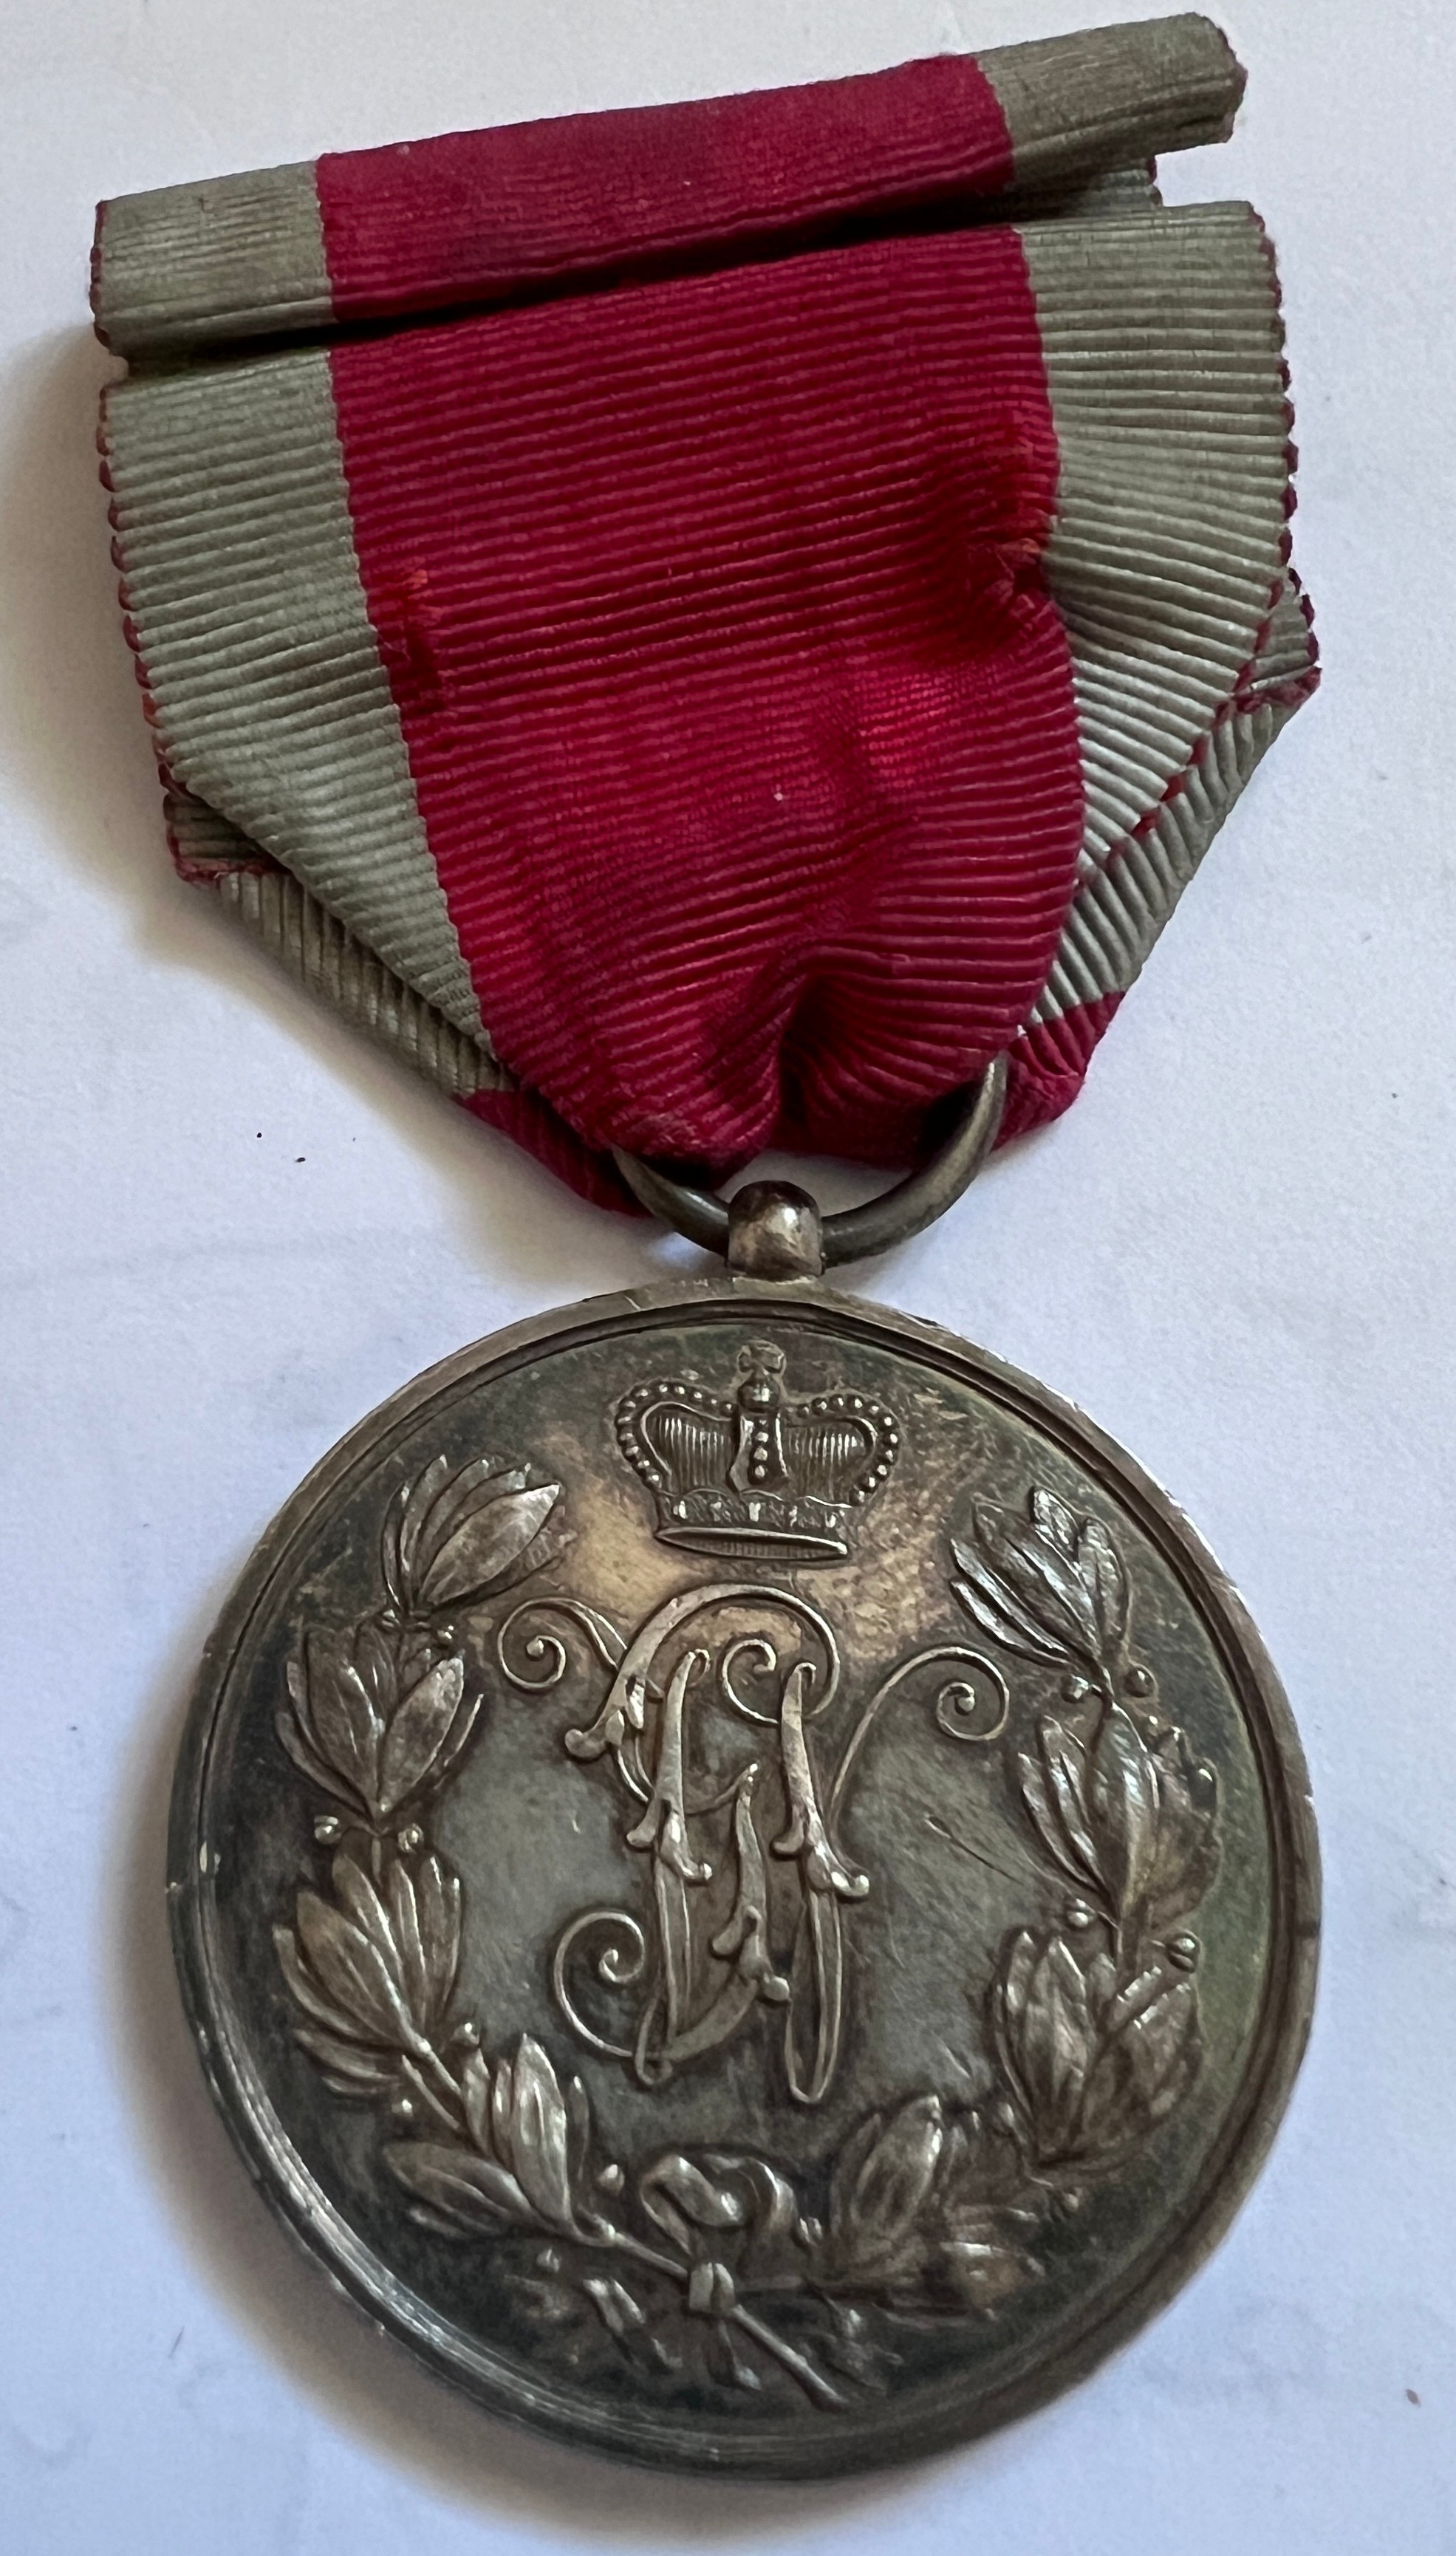 Schaumburg-Lippe, Military Merit Medal 1914-1918, silver, with crossed swords on ribbon in fitted - Image 4 of 5